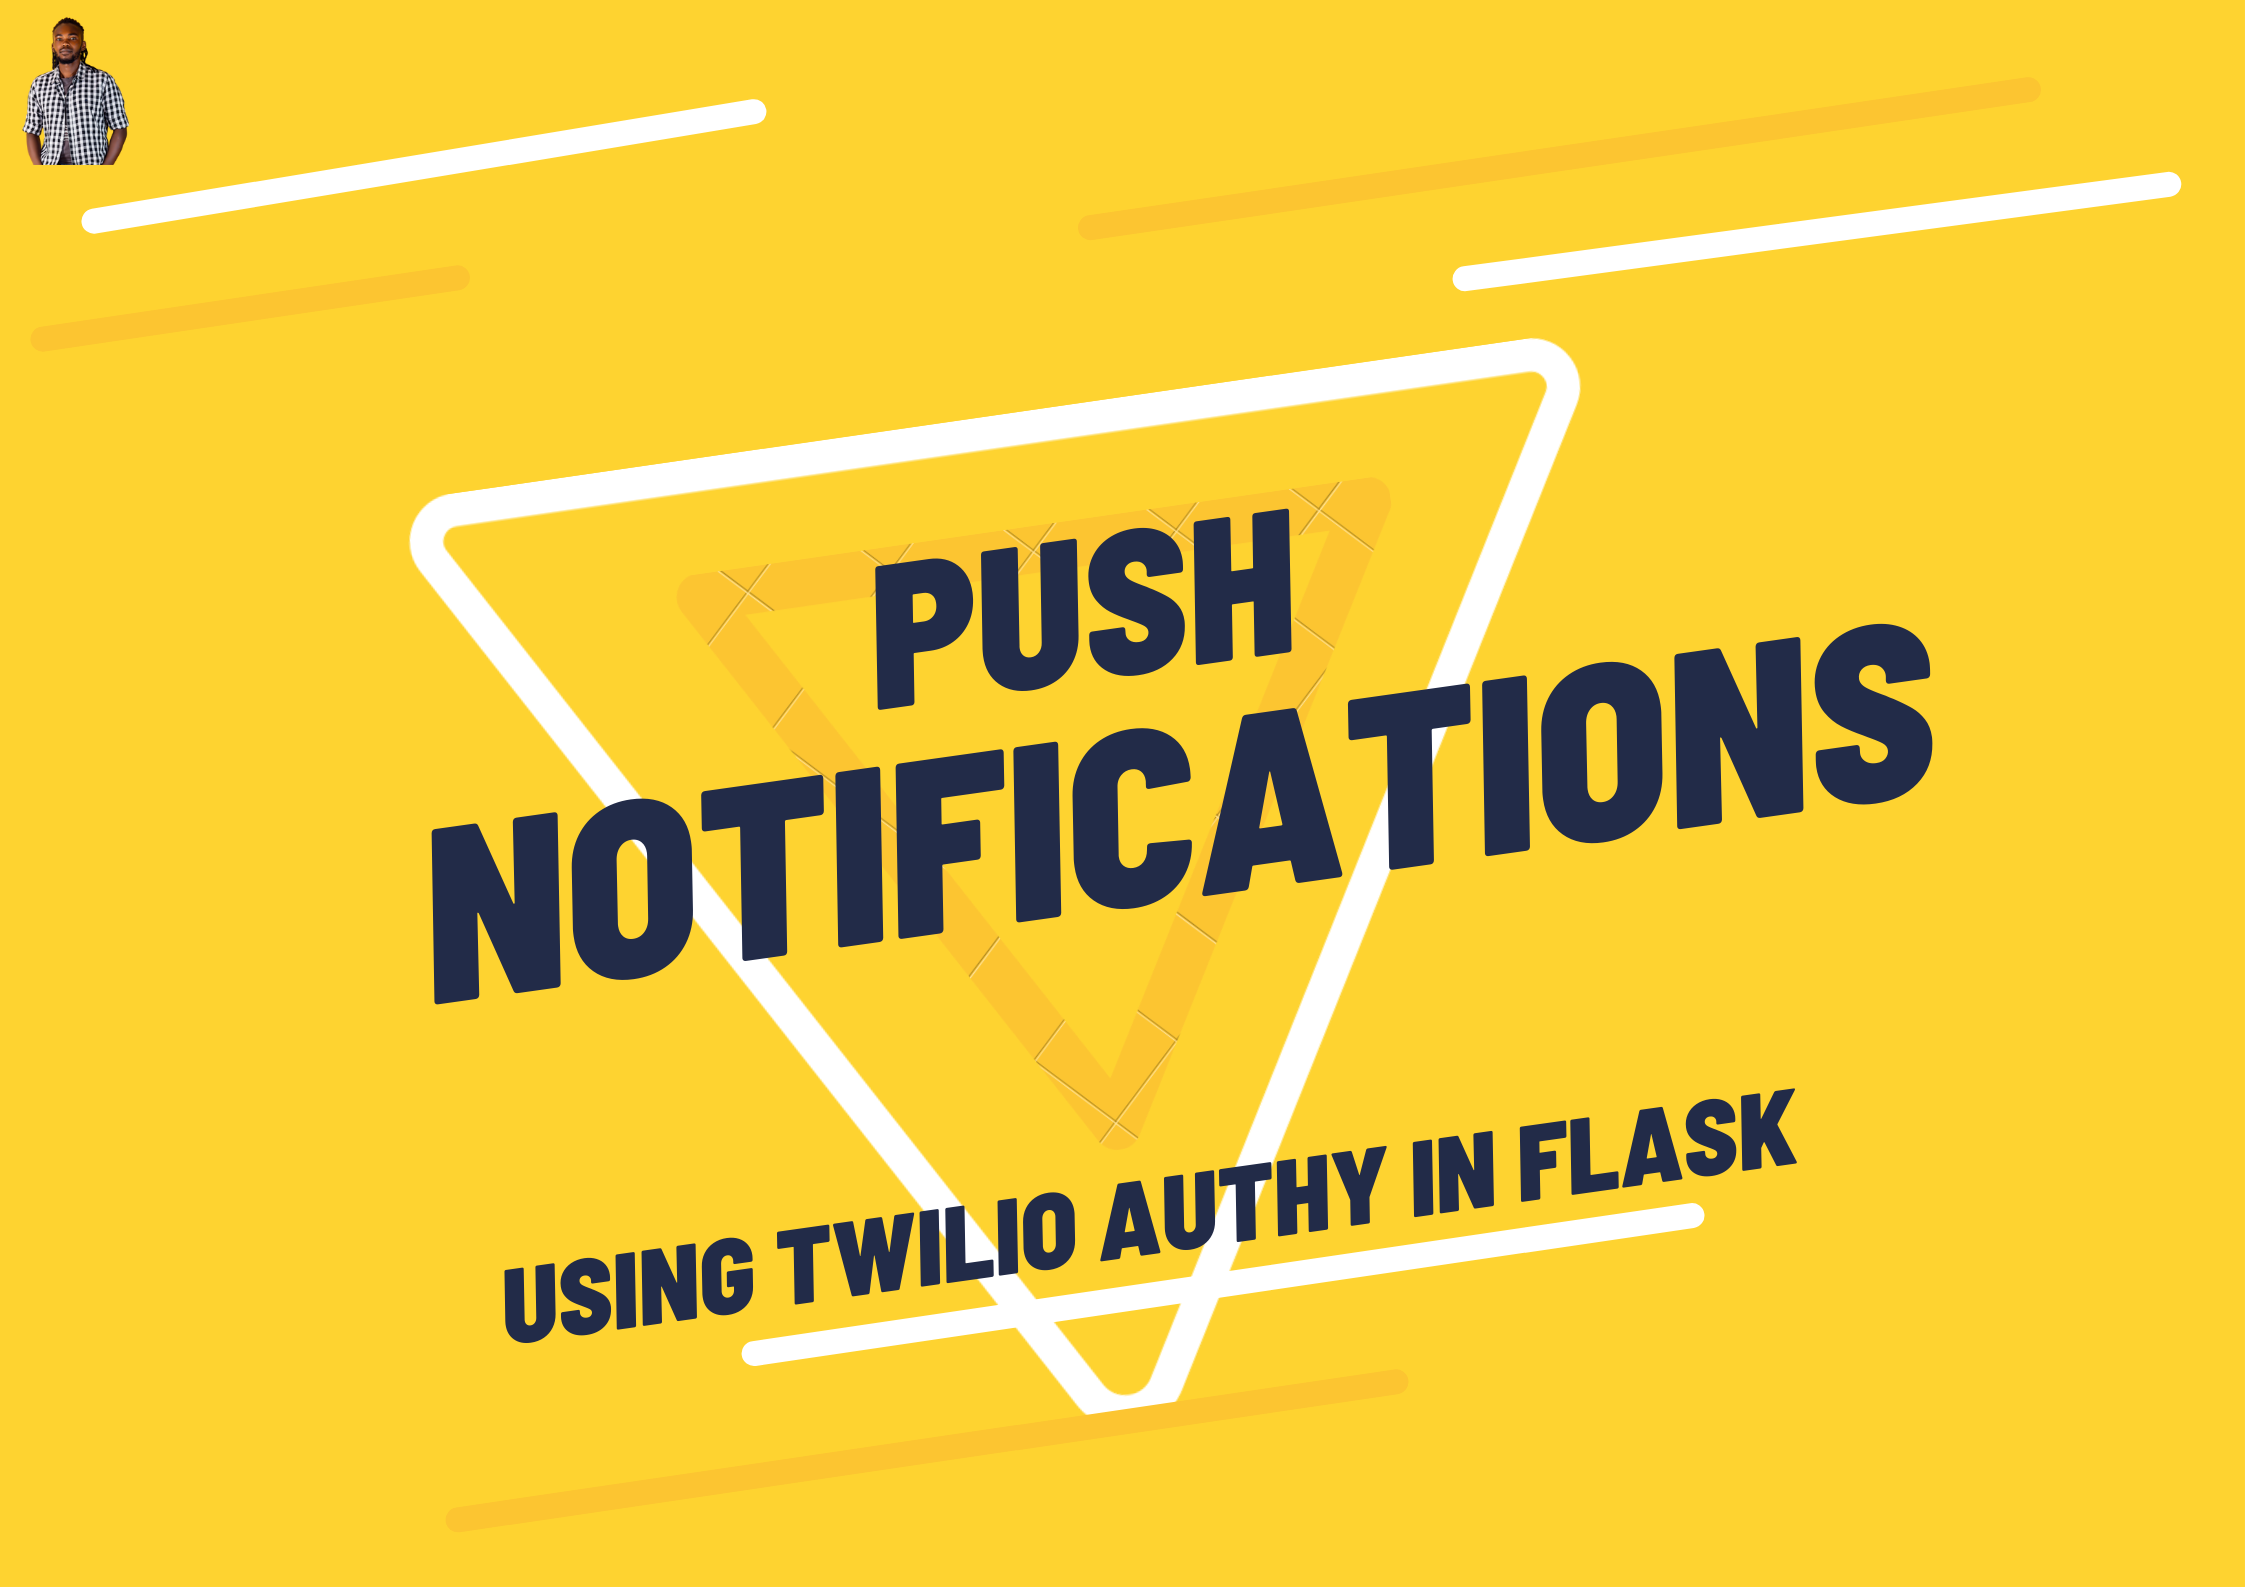 Push Notifications Using Twilio Authy API In Flask